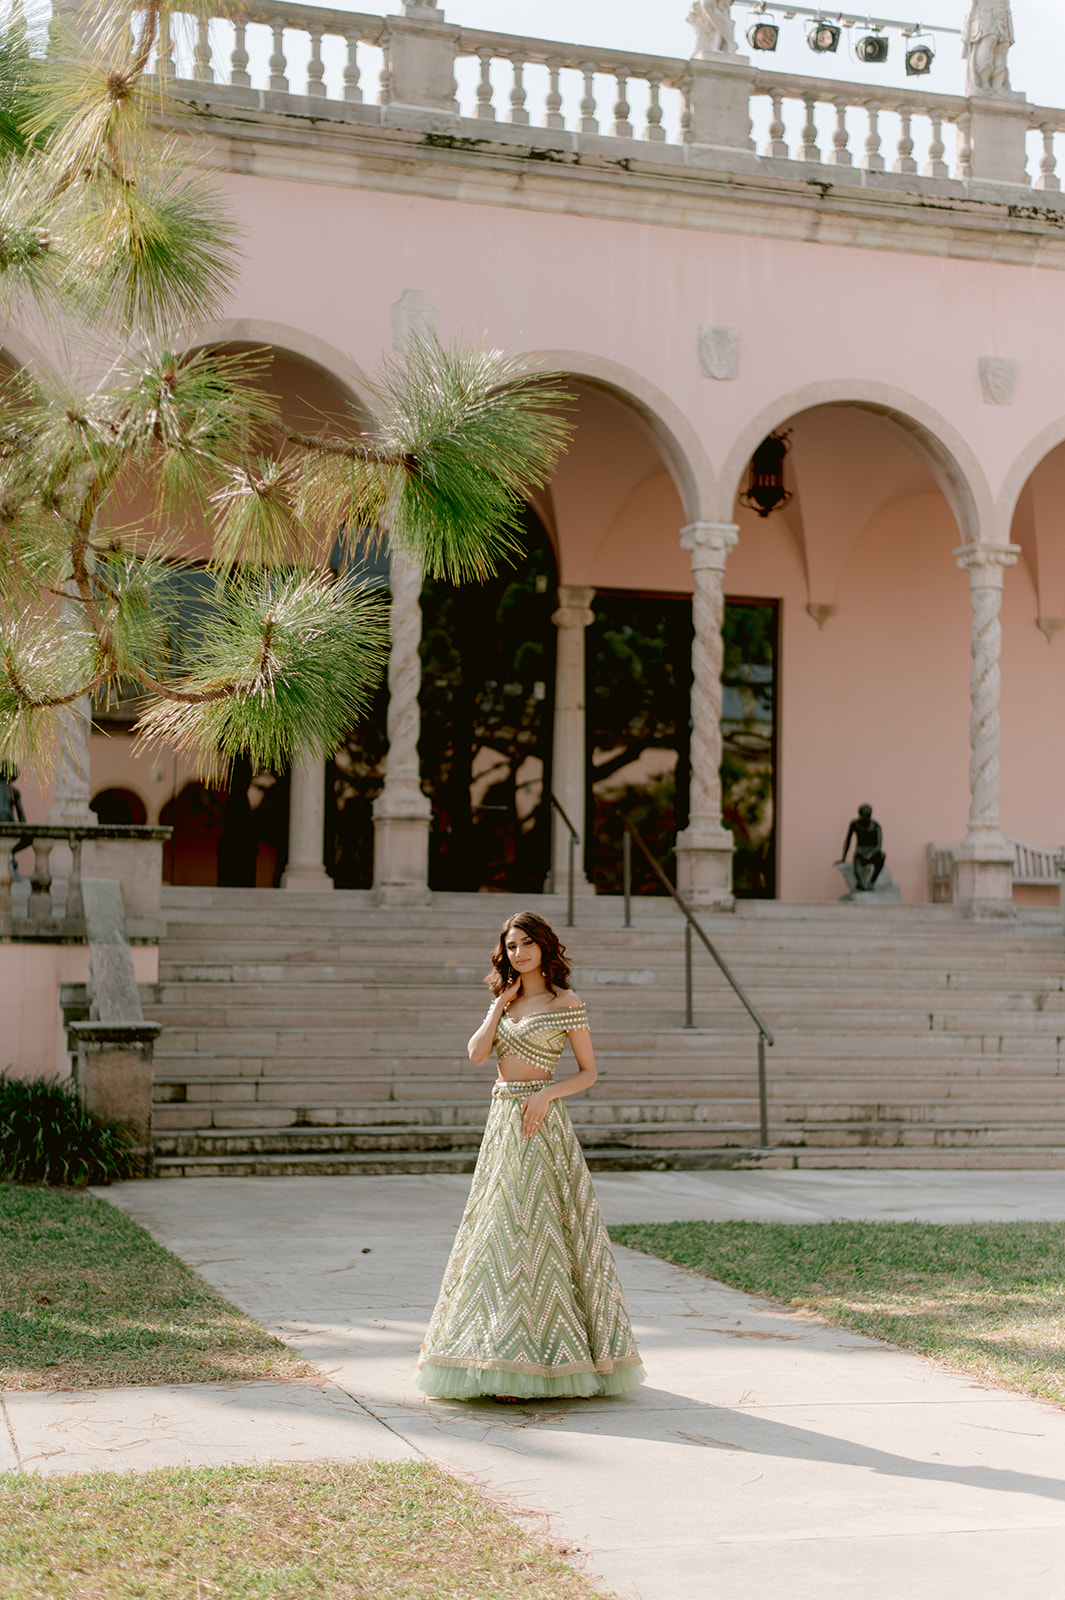 "Elegant and timeless engagement session captured at the Ringling Museum"
